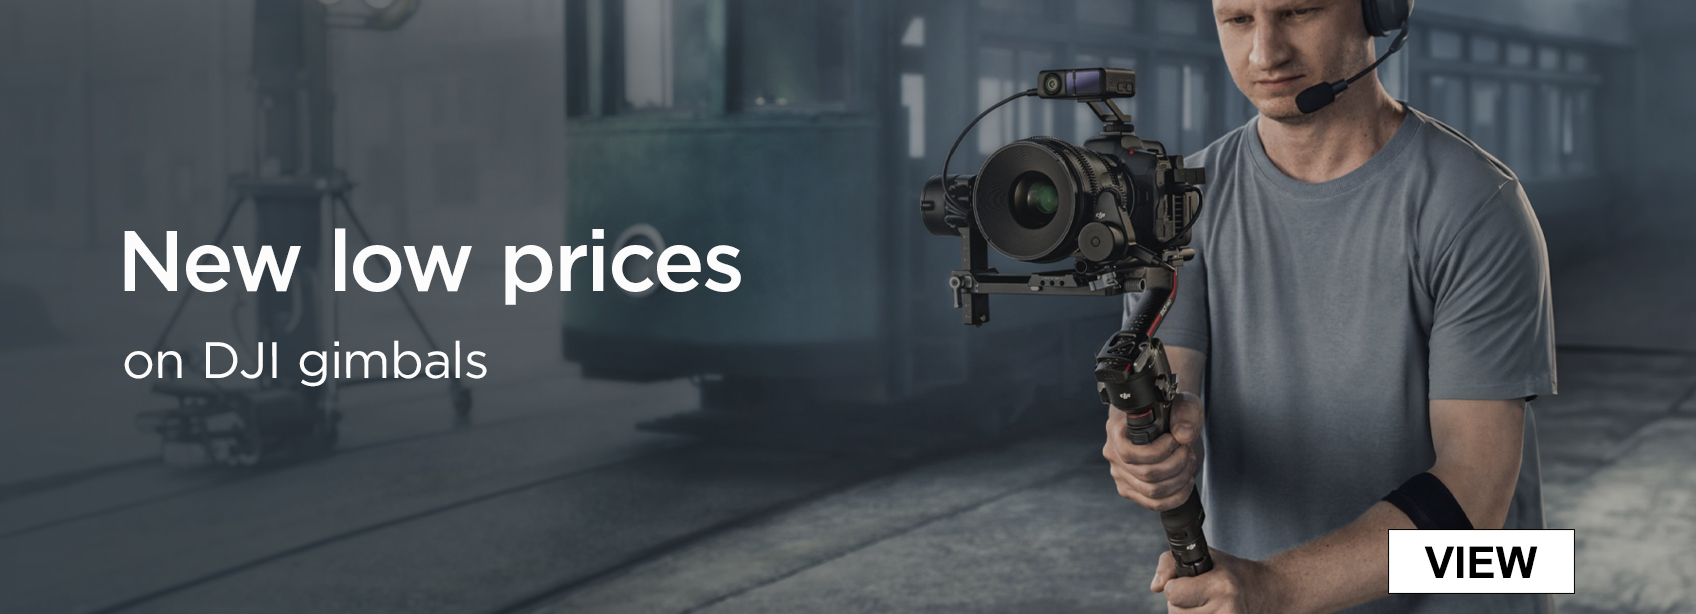 New low prices on DJI gimbals